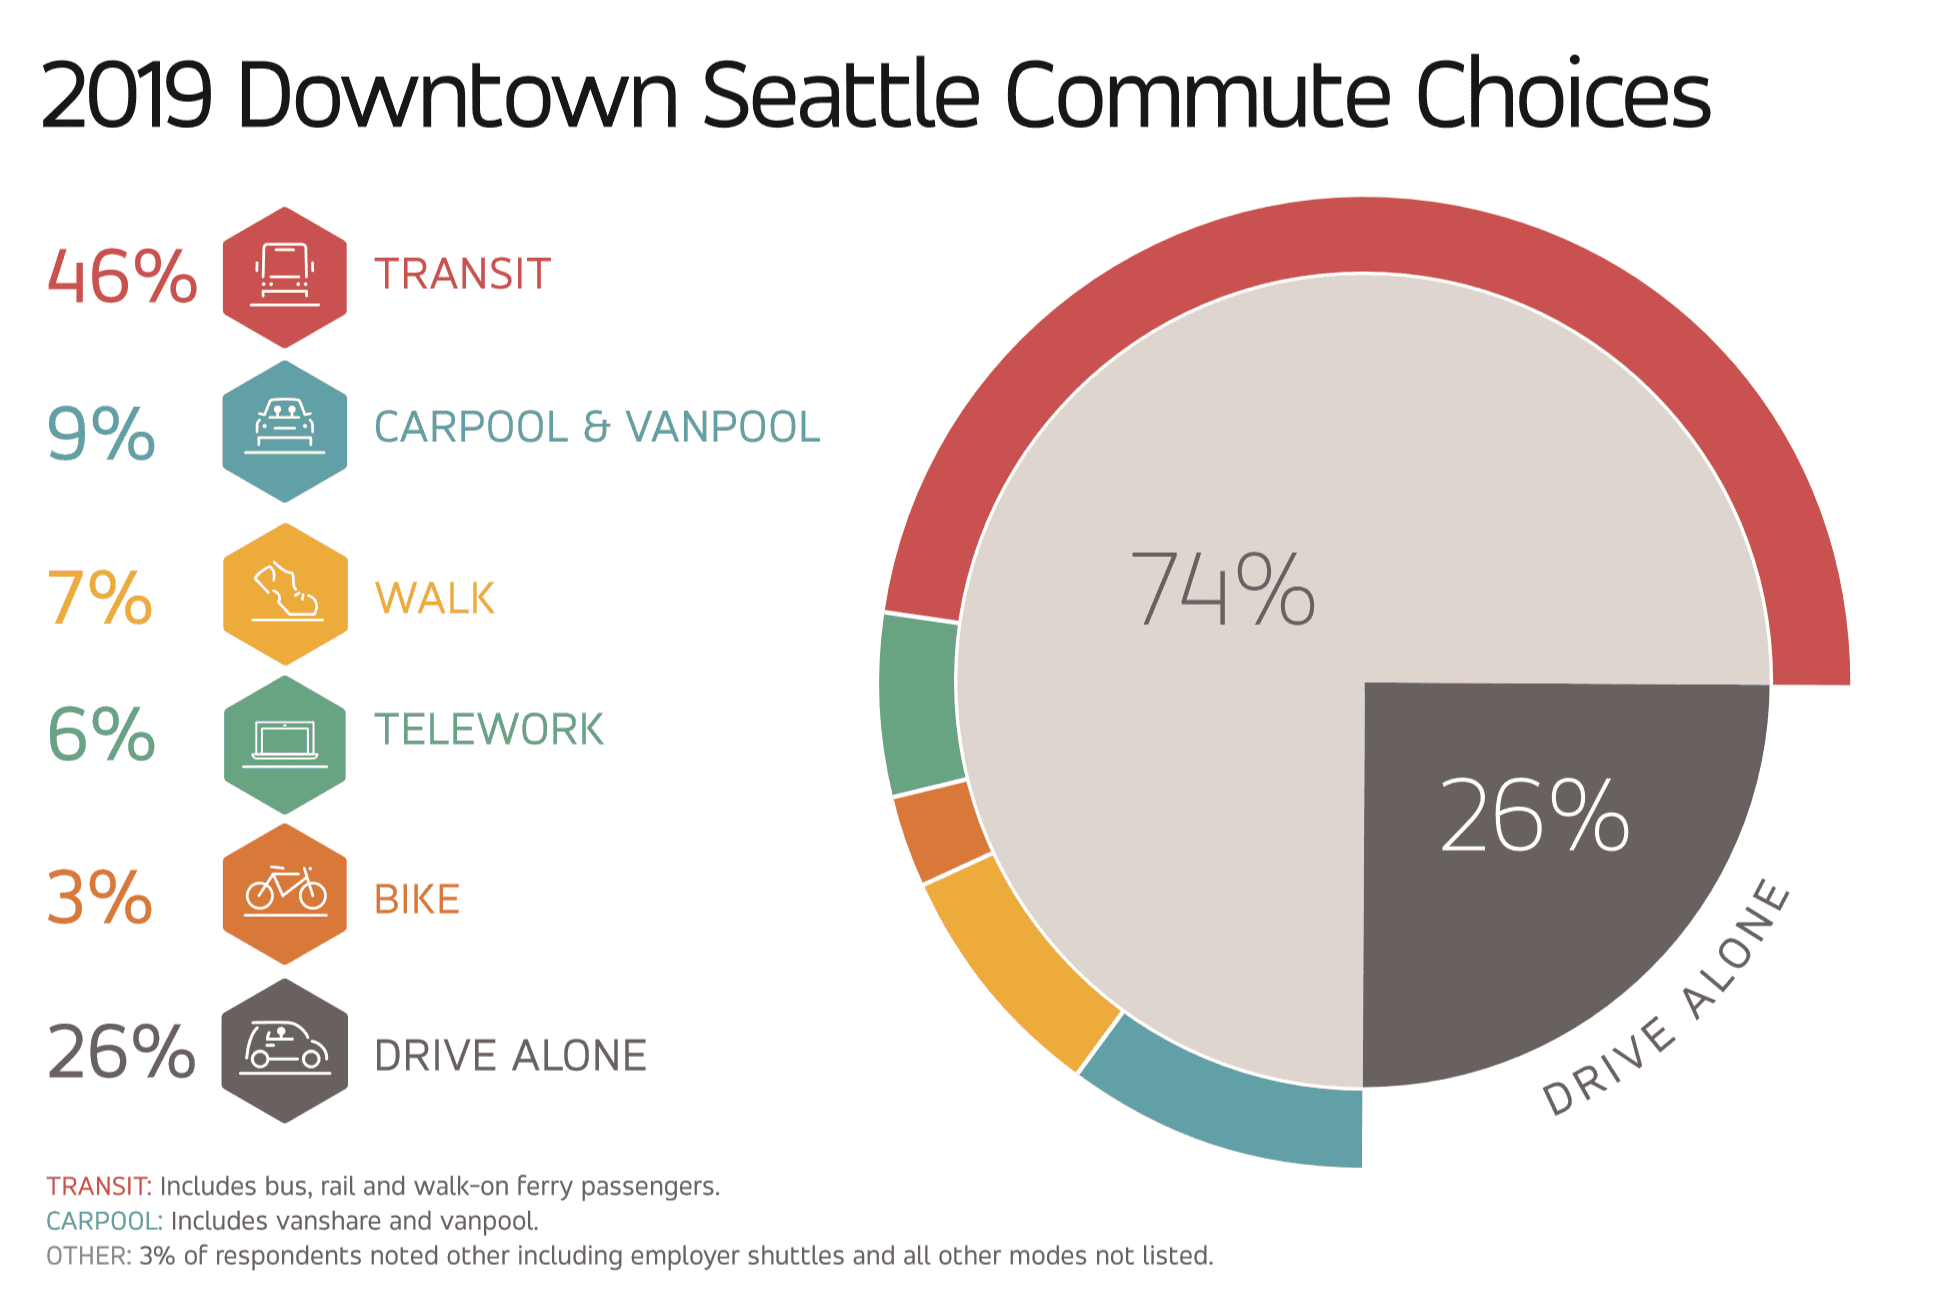 A graph showing how Downtown Seattle commuters choose to get around.